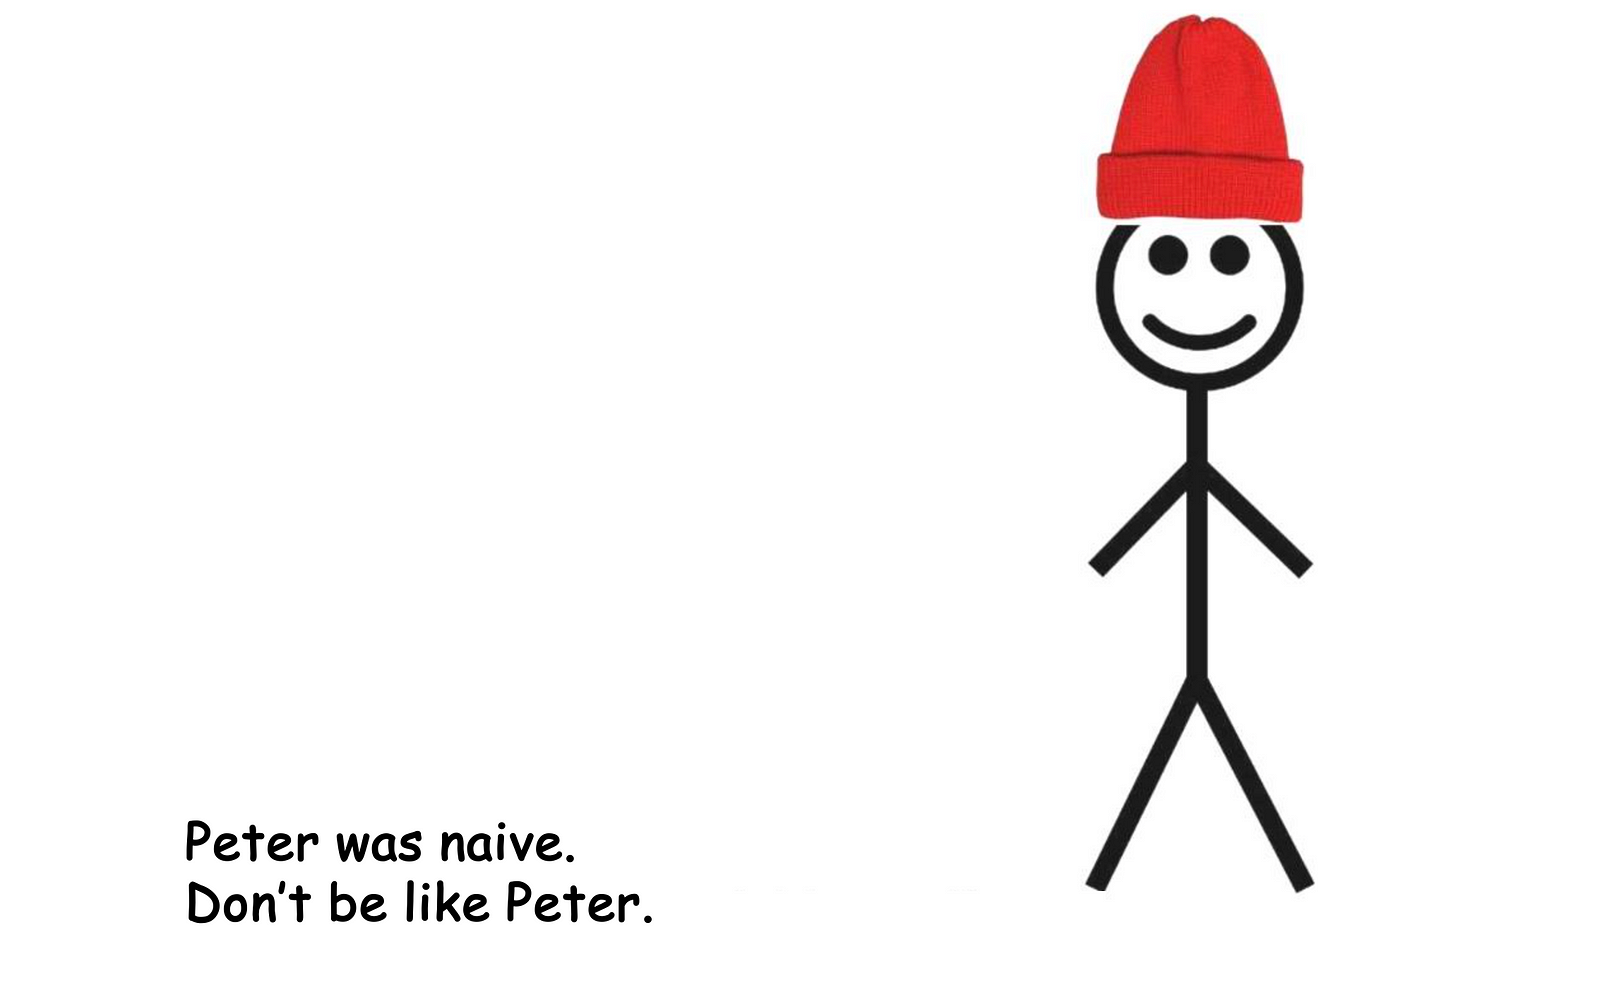 Peter was naive. Don’t be like Peter.